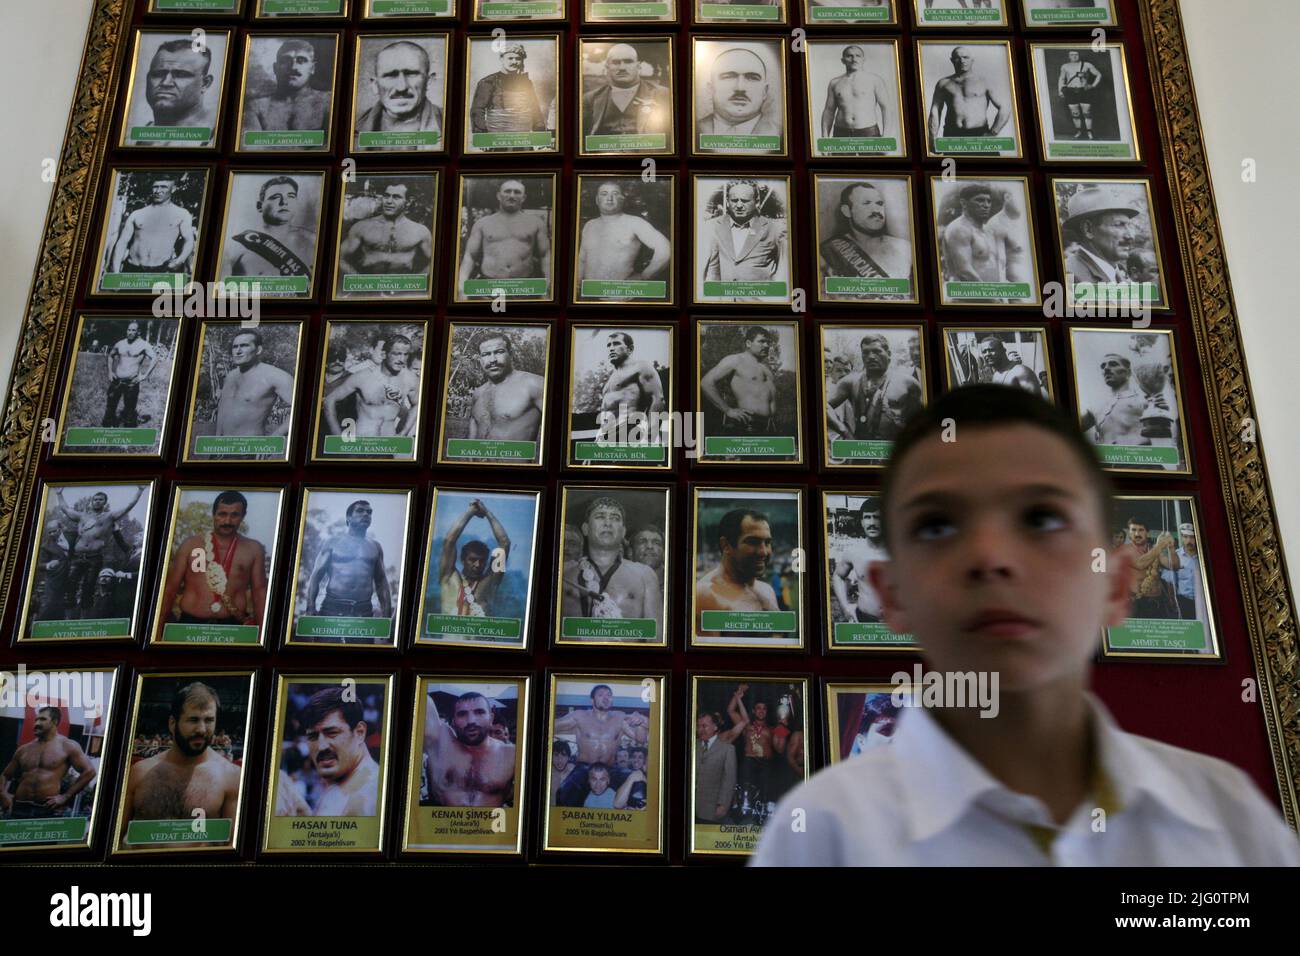 Kırkpınar (Turkish Oil Wrestling). Young boy pictured in front of the stand with photographs of the champions of the Kirkpinar Tournament won the competition in different years of the 20th century in the Kırkpınar House (Kırkpınar Museum) in Edirne, Turkey. Stock Photo